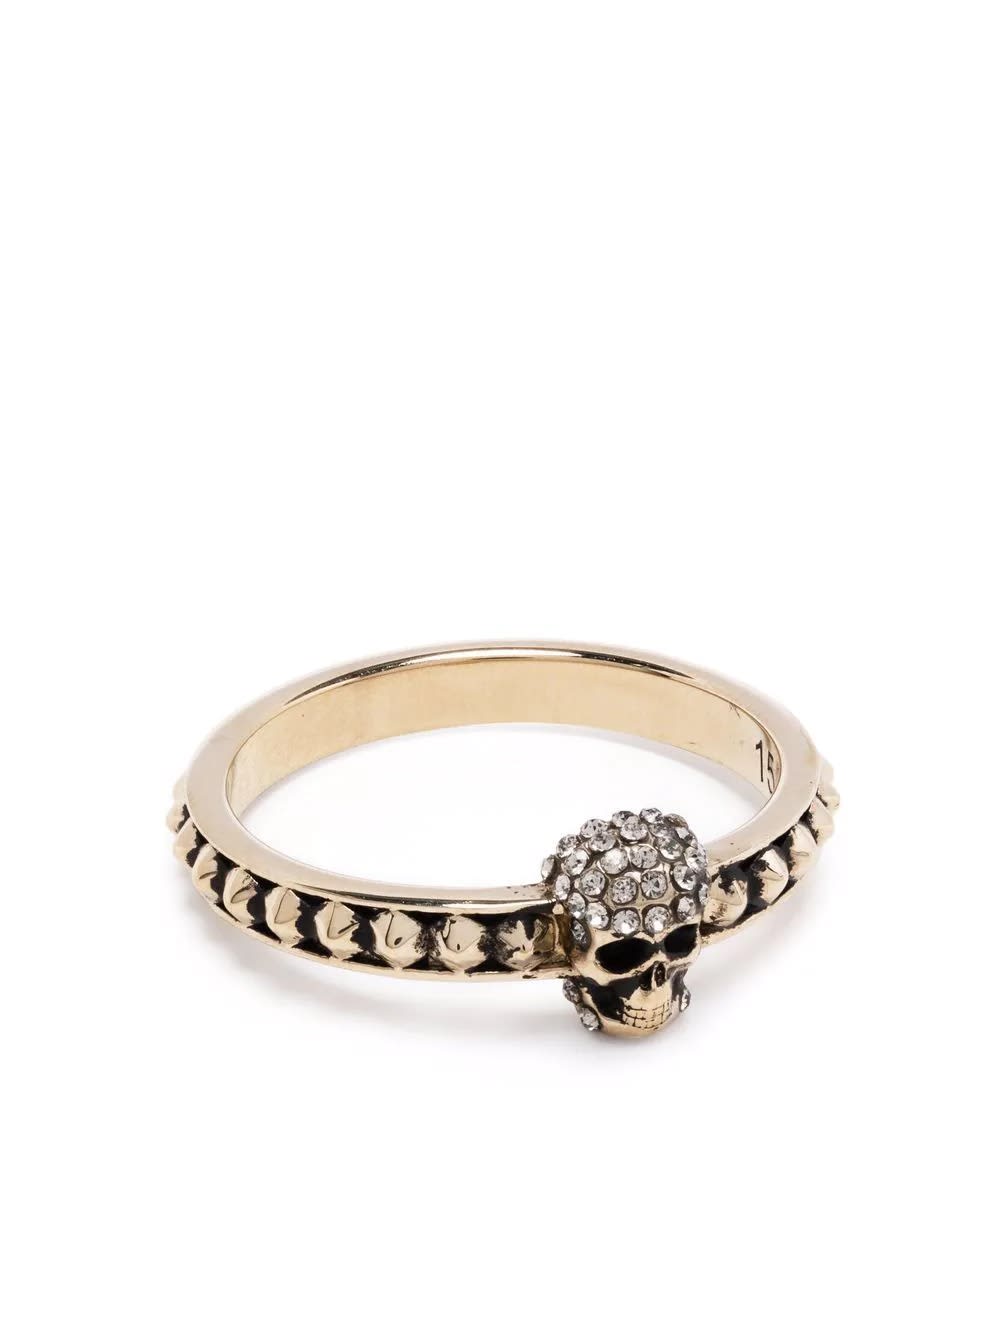 Alexander Mcqueen Light Gold Ring With Pavé And Skull